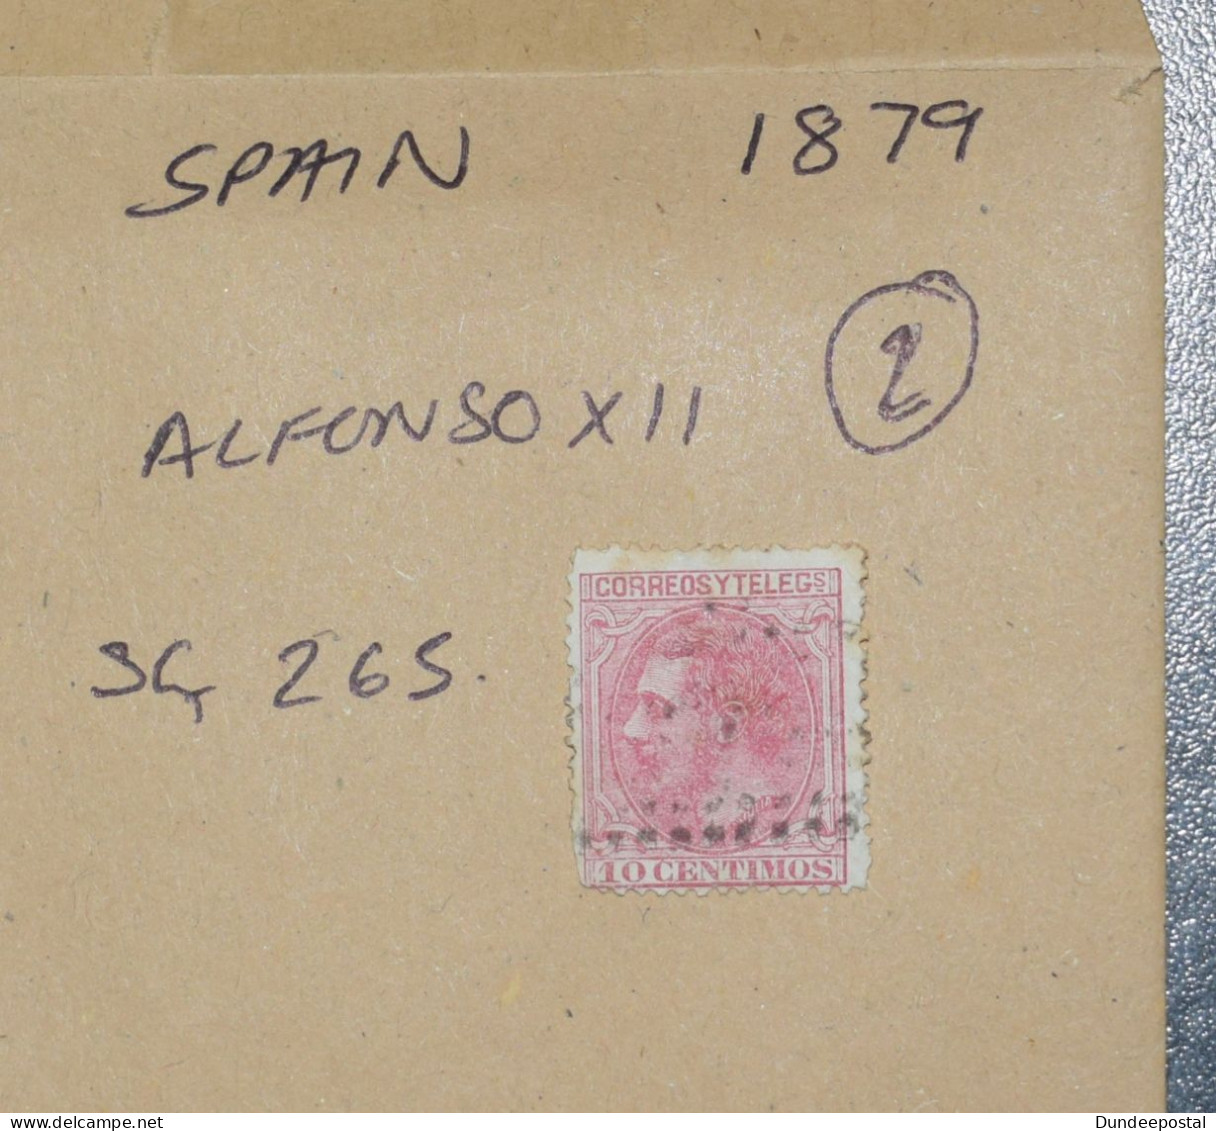 SPAIN  STAMPS  Alfonso XII Red 10c 1879  ~~L@@K~~ - Nuevos